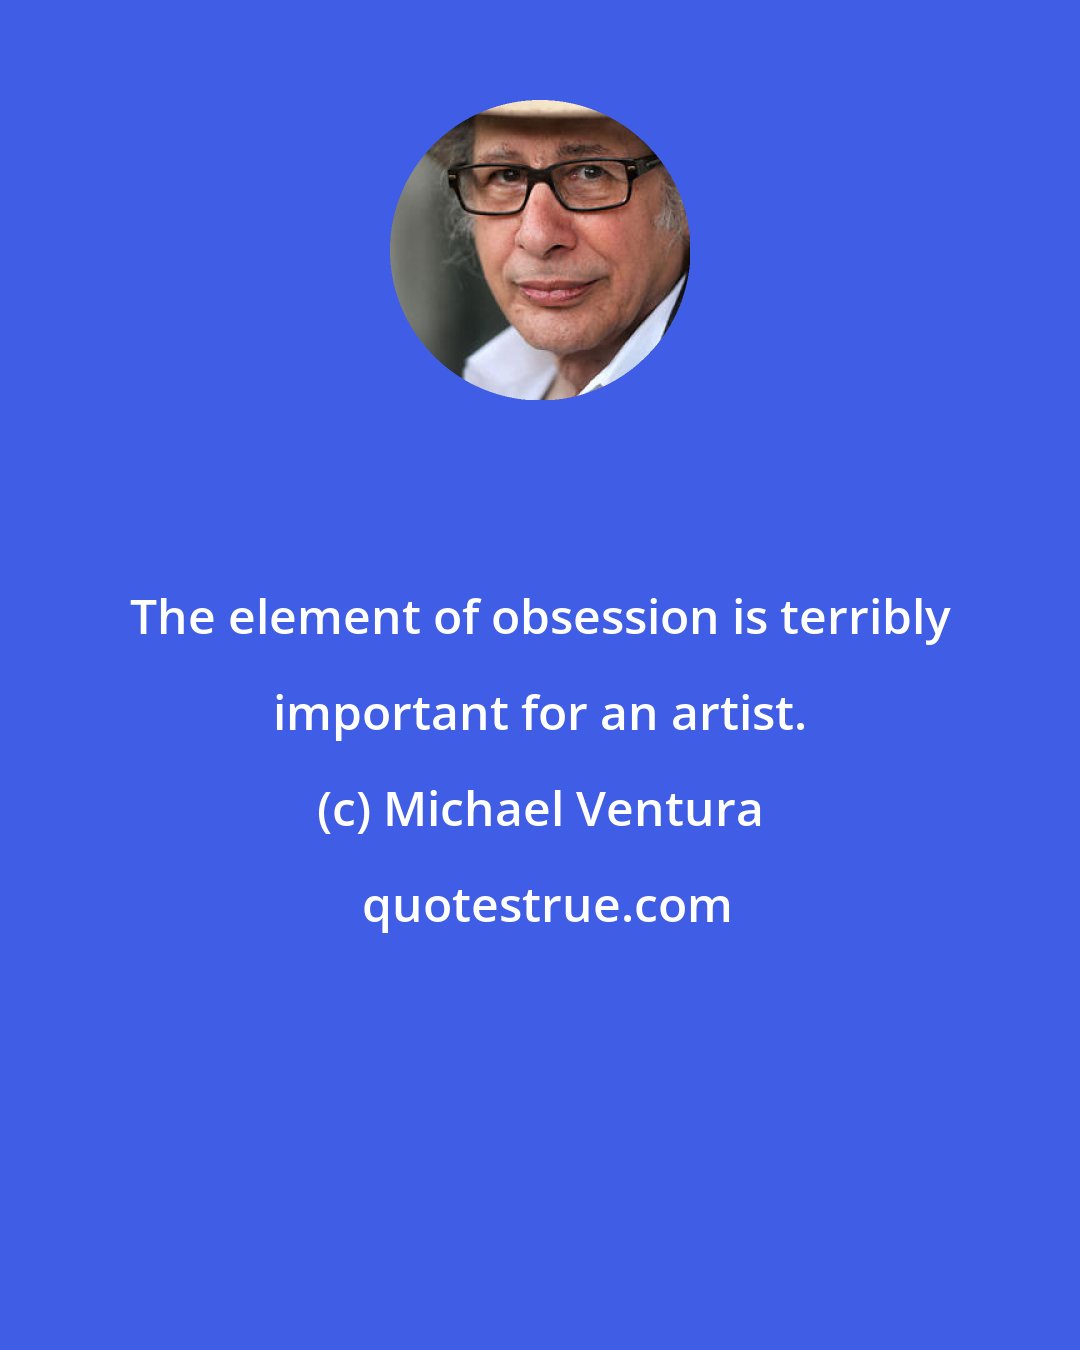 Michael Ventura: The element of obsession is terribly important for an artist.